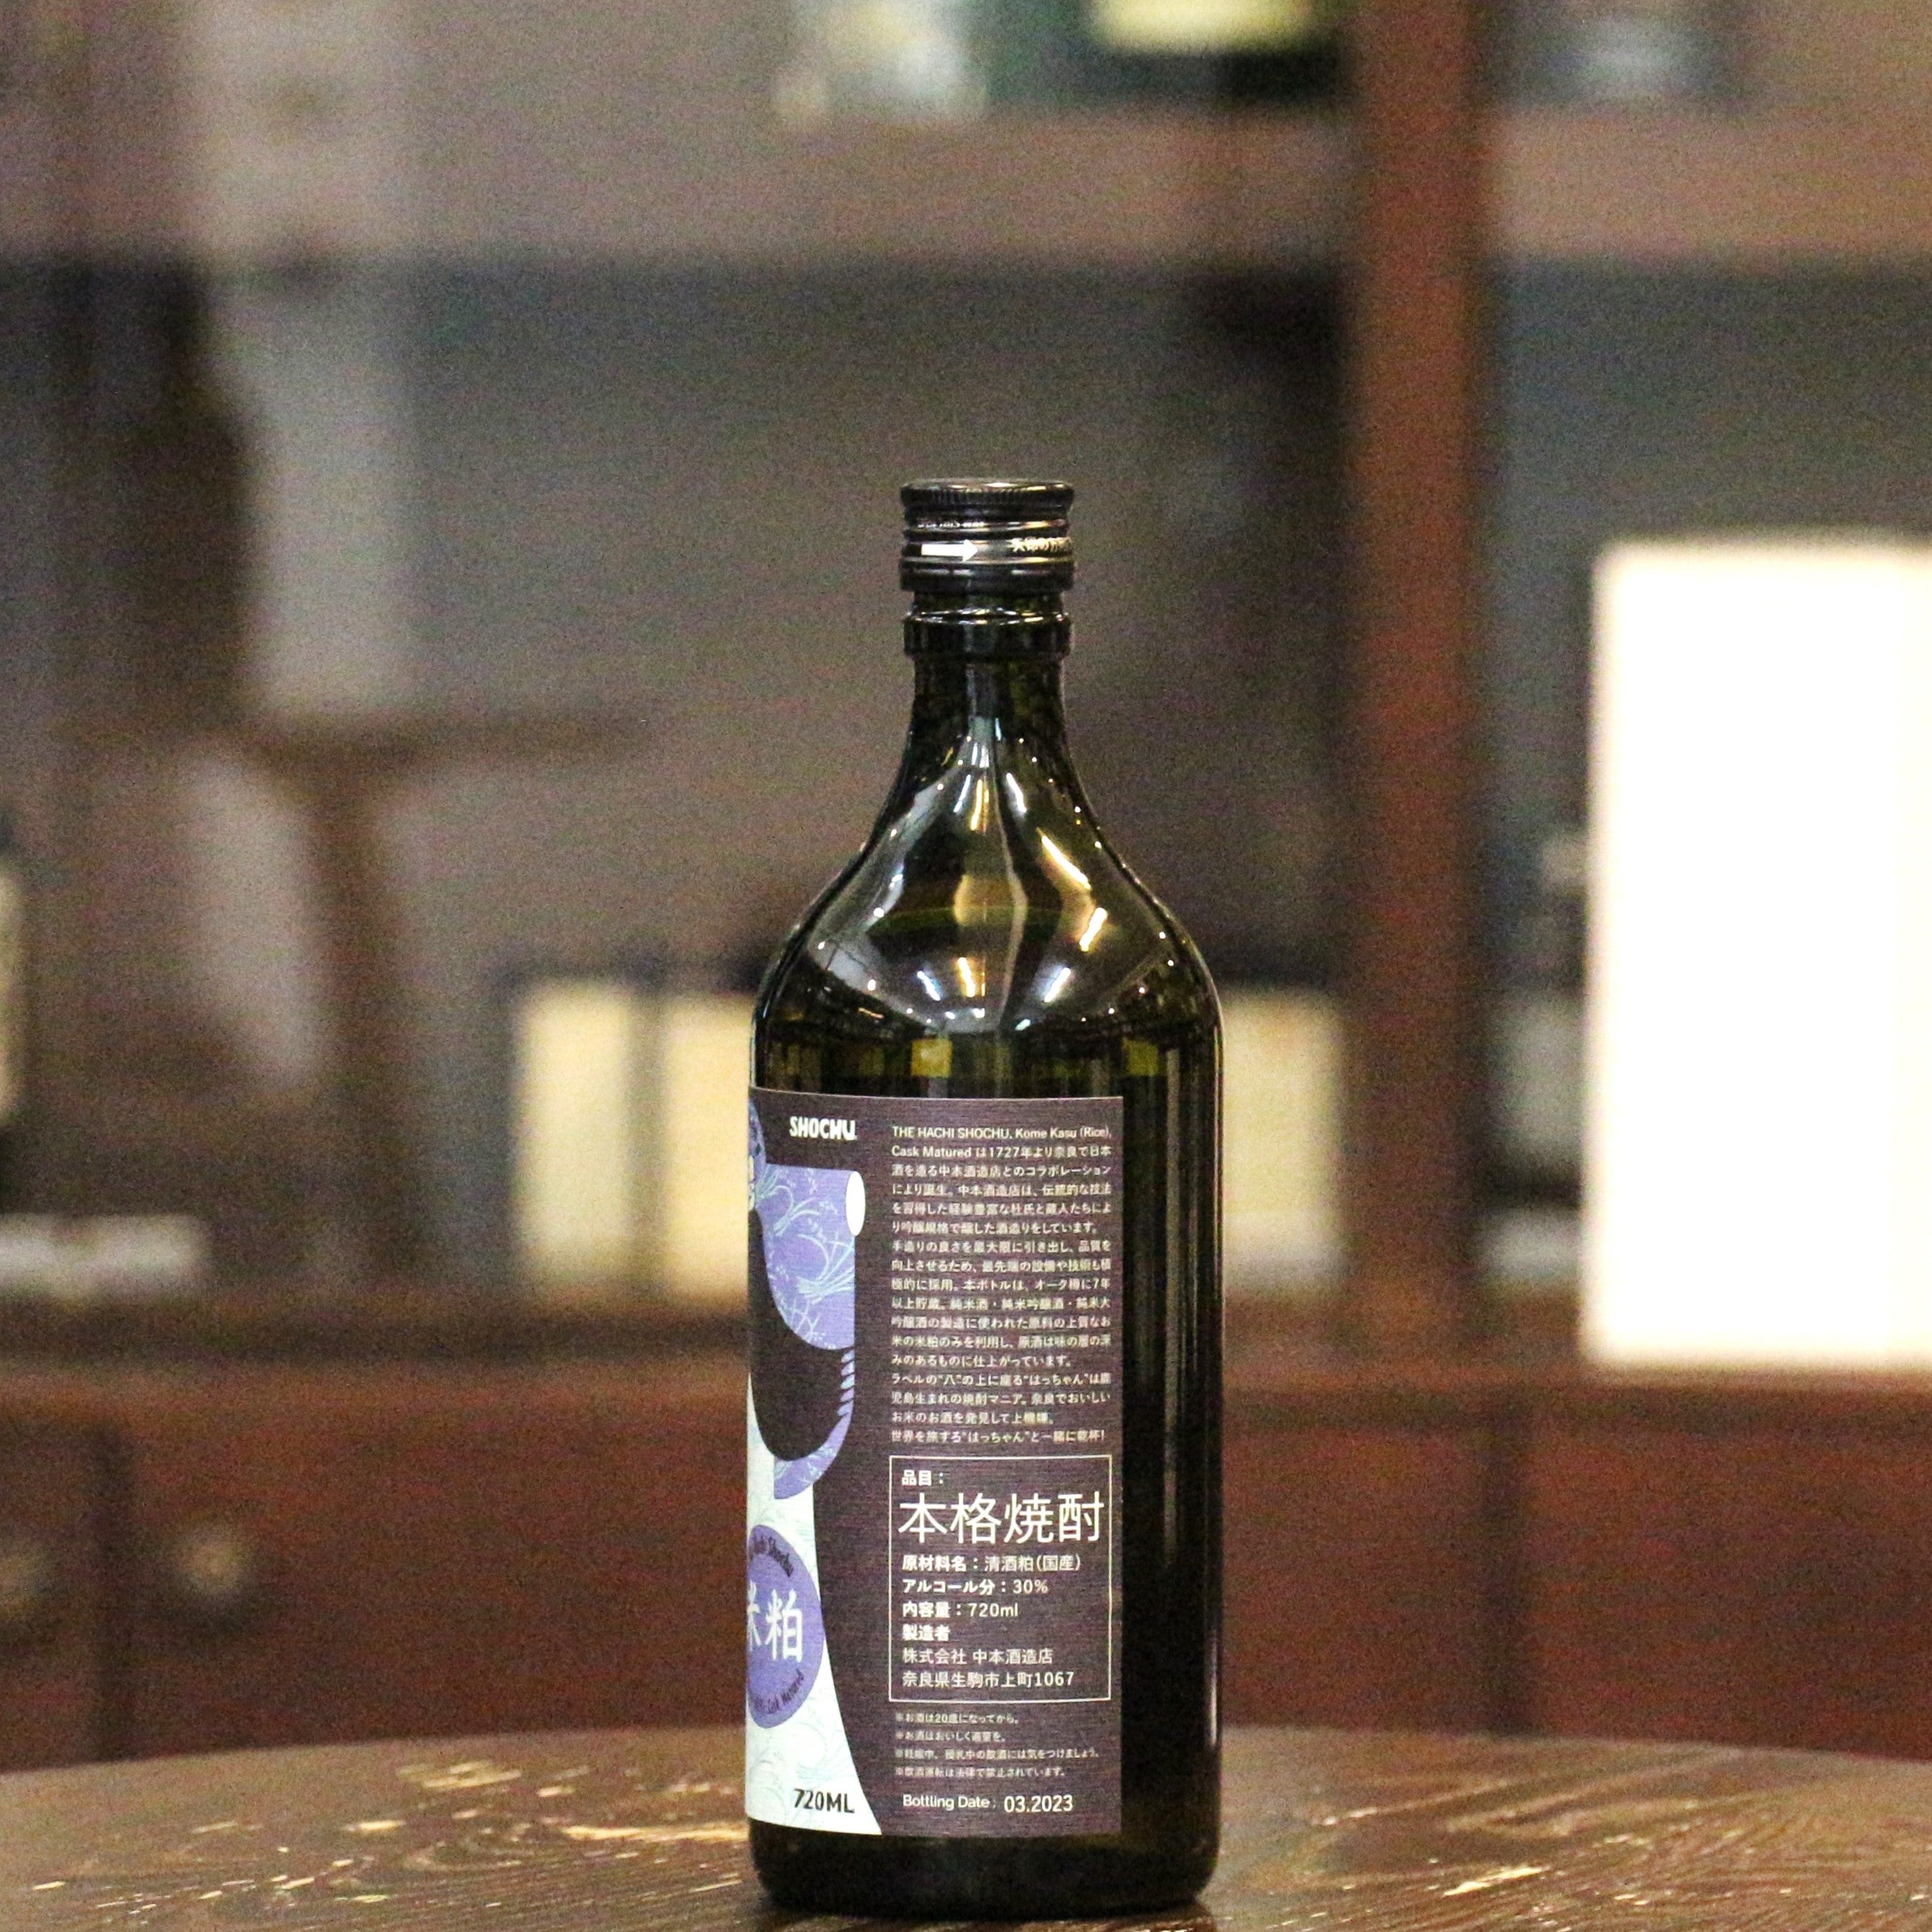 THE HACHI SHOCHU, Rice (KOME KASU), Cask Matured is a collaboration with Nakamoto Sake Brewery Co.,Ltd, located in Nara, Japan and with a history dating back to 1727.